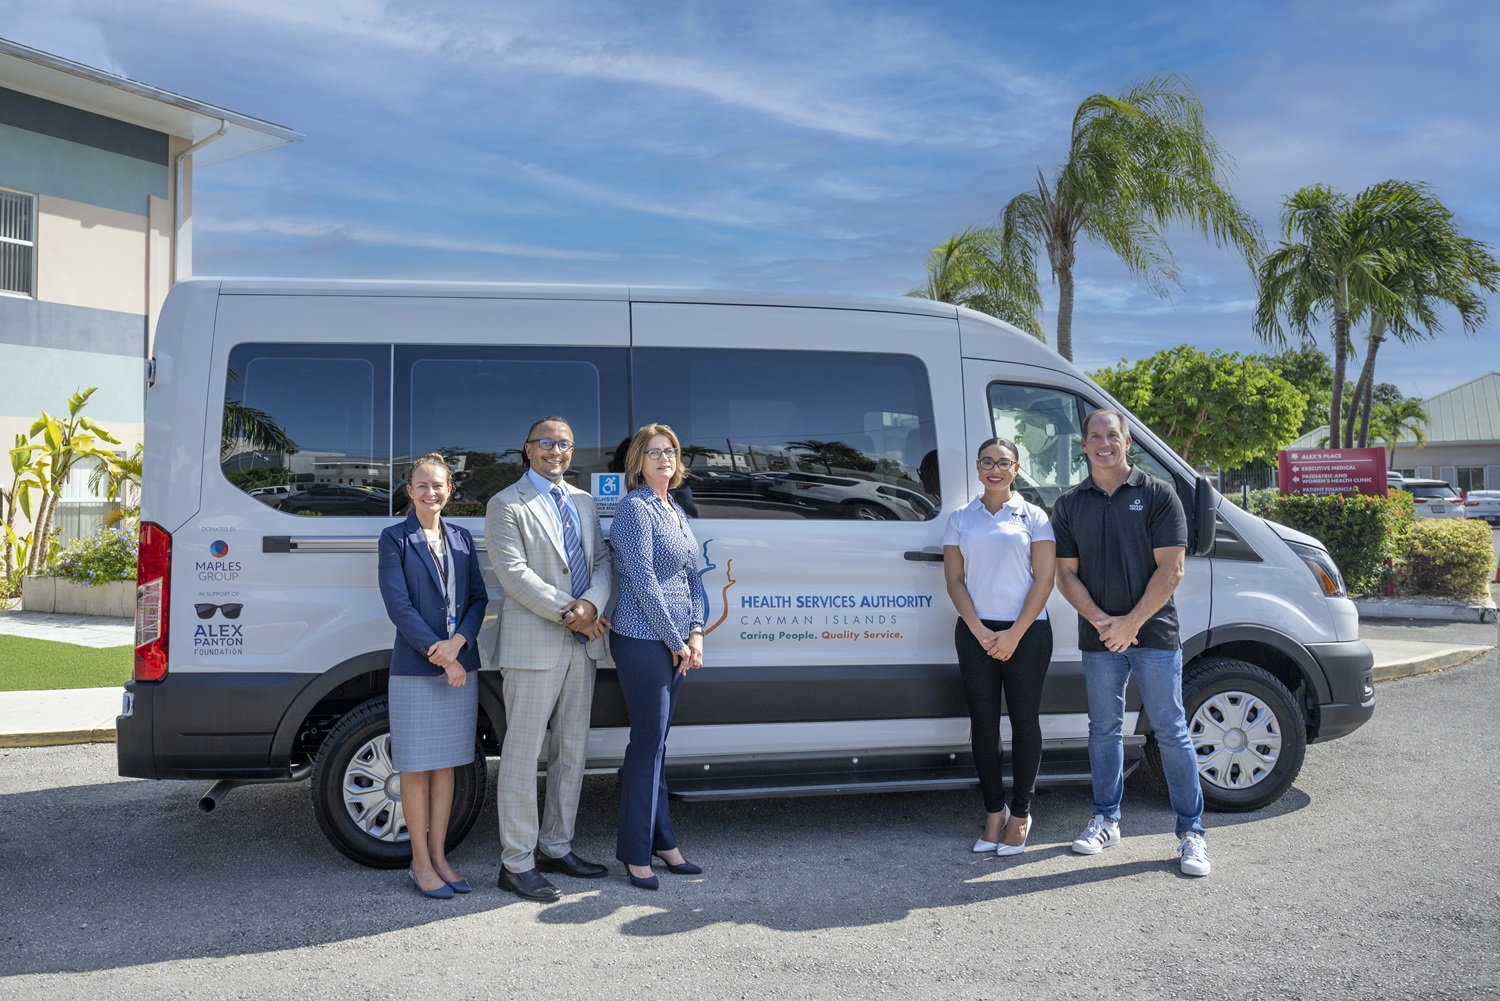 White van branded with Alex Panton Foundation, Health Services Authority and Maples Group logos parked in front of Alex's Place location. Representatives from HSA, Alex Panton Foundation and Maples Group stand in front of the van.